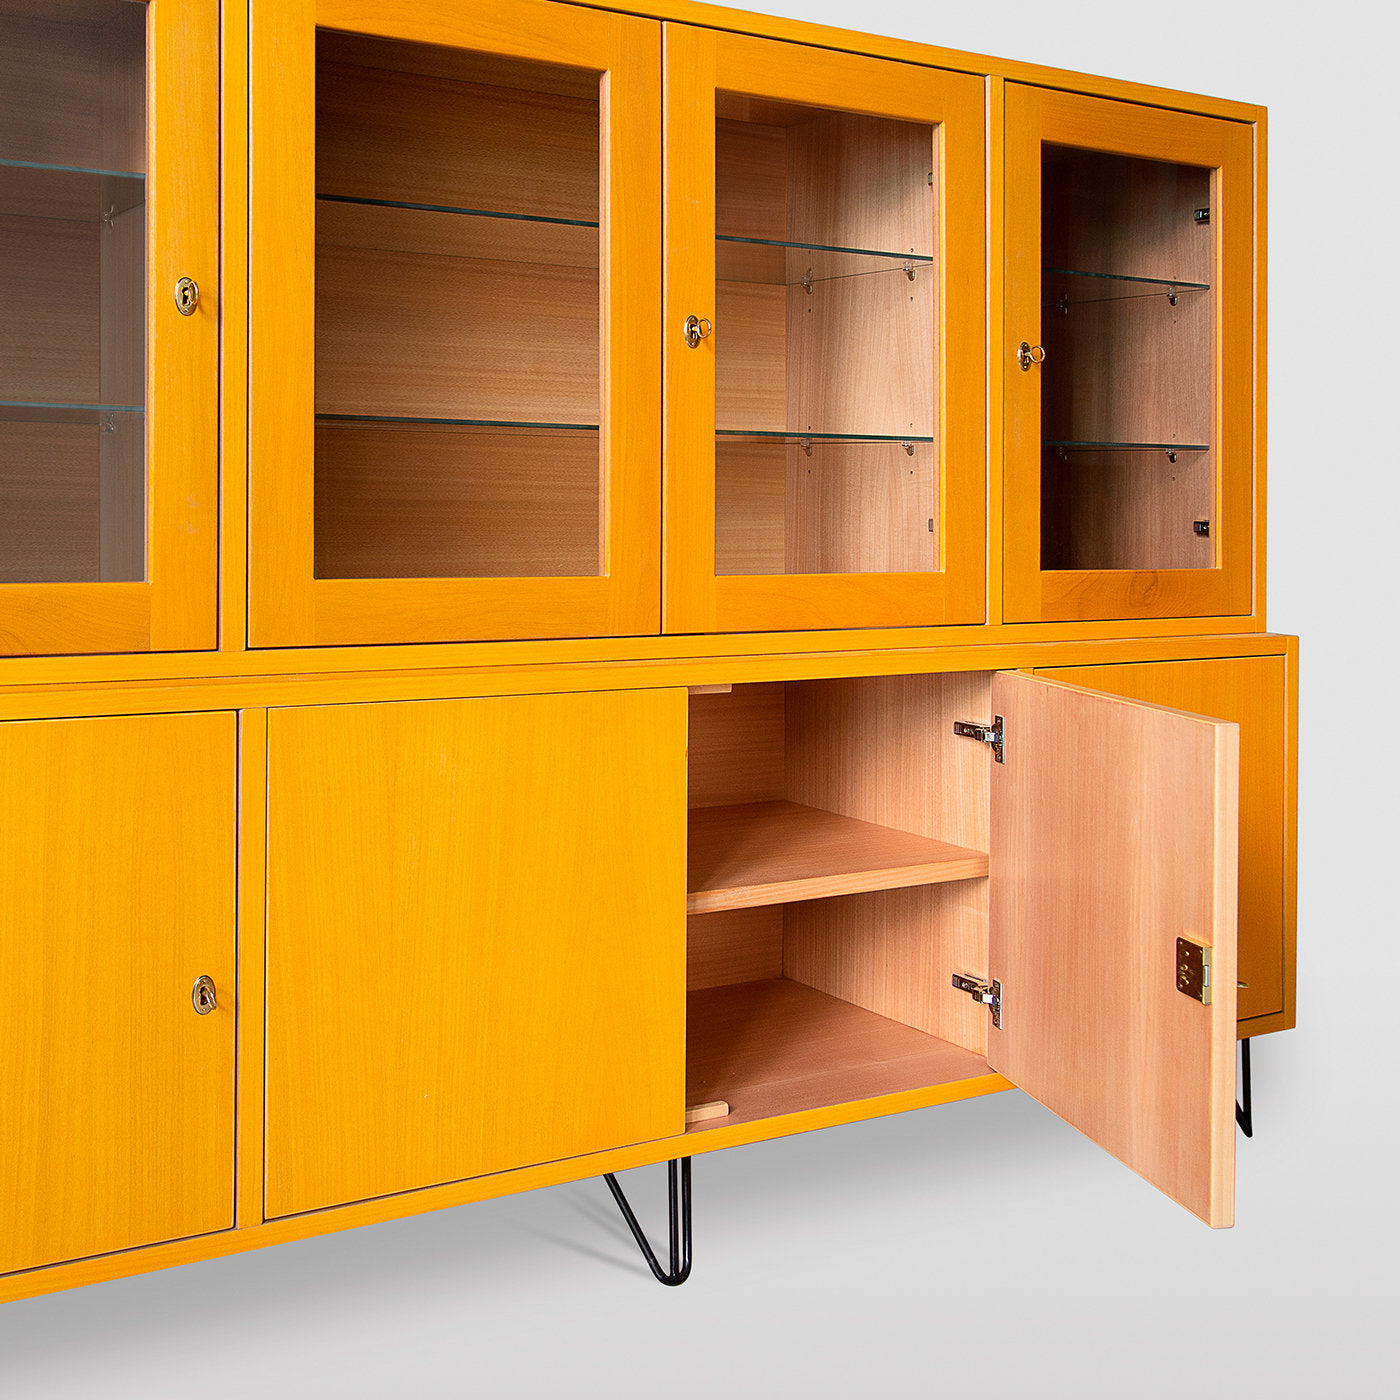 50s-style Yellow Cabinet - Alternative view 3